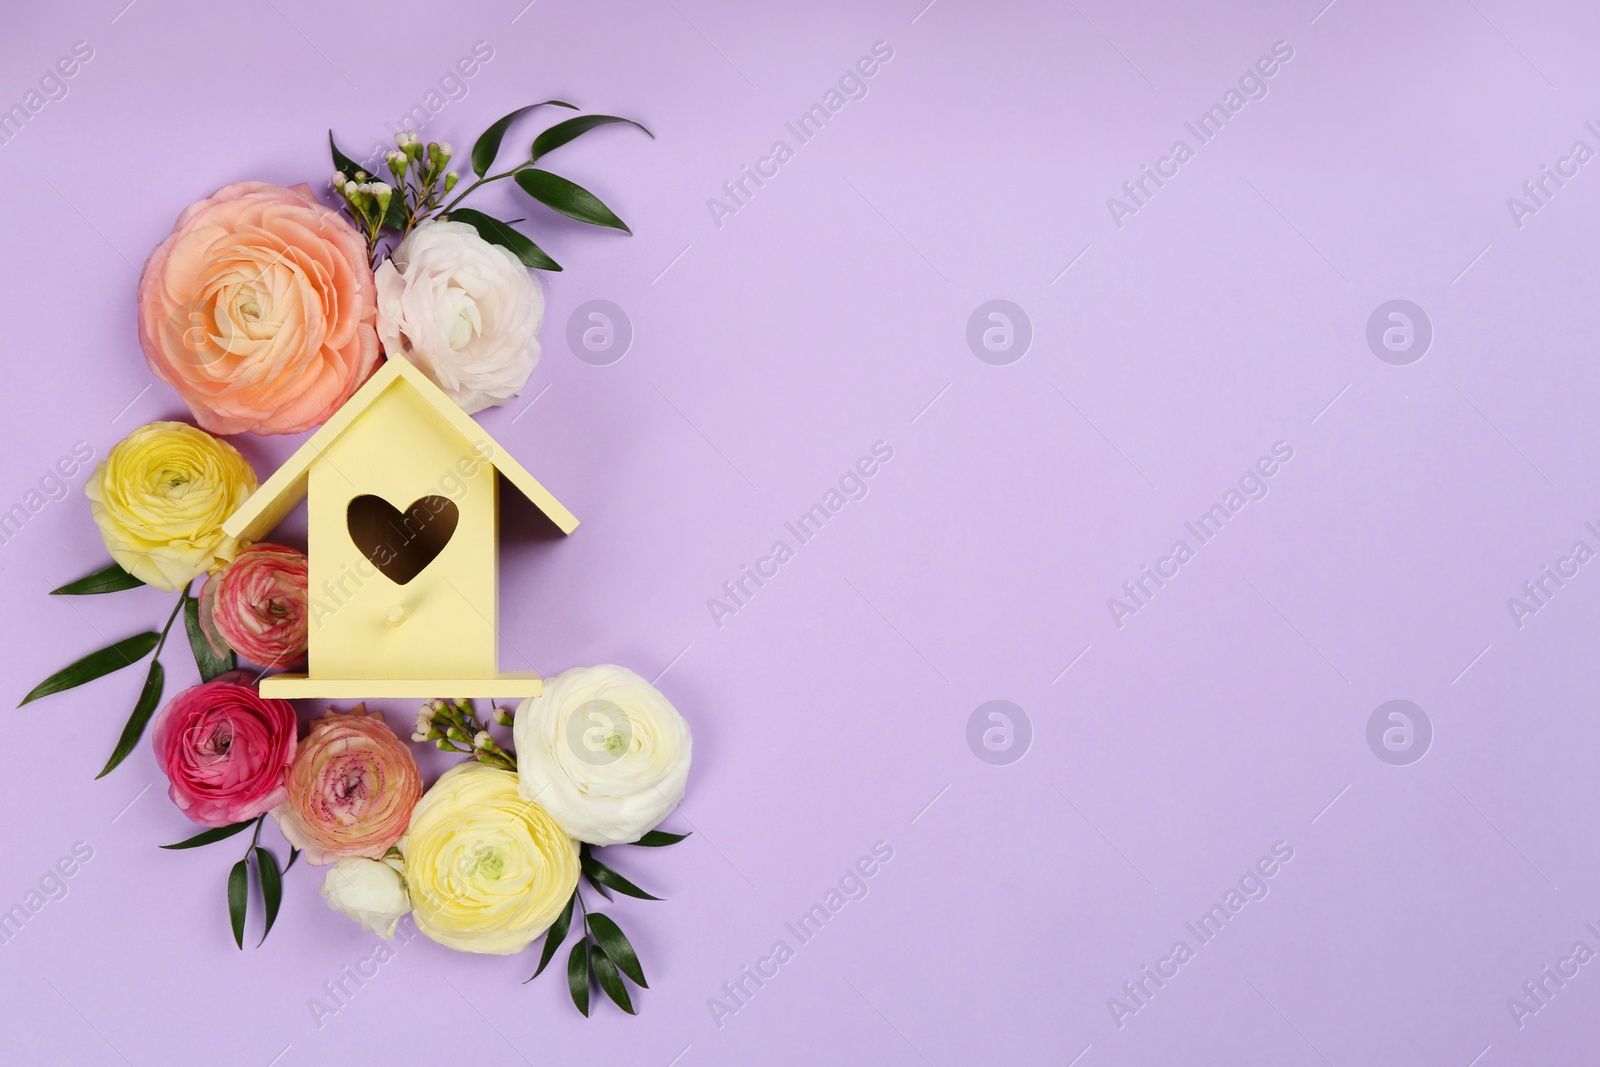 Photo of Stylish bird house and fresh flowers on violet background, flat lay. Space for text